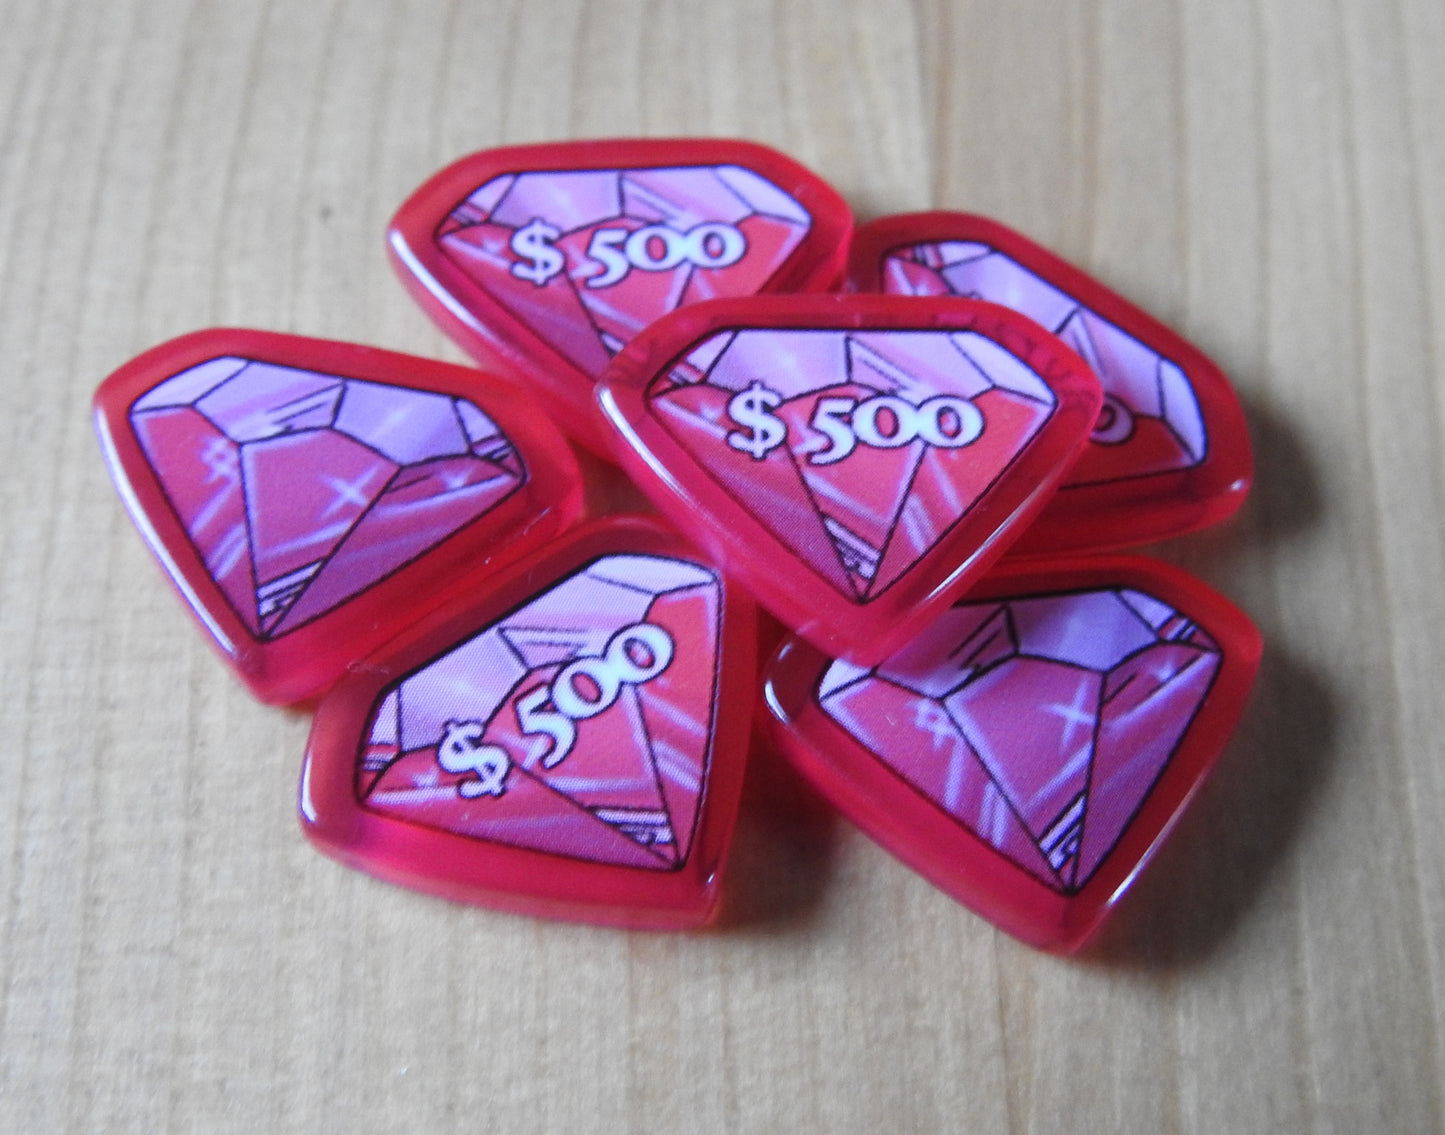 Close-up view of the 6 gems that are included.